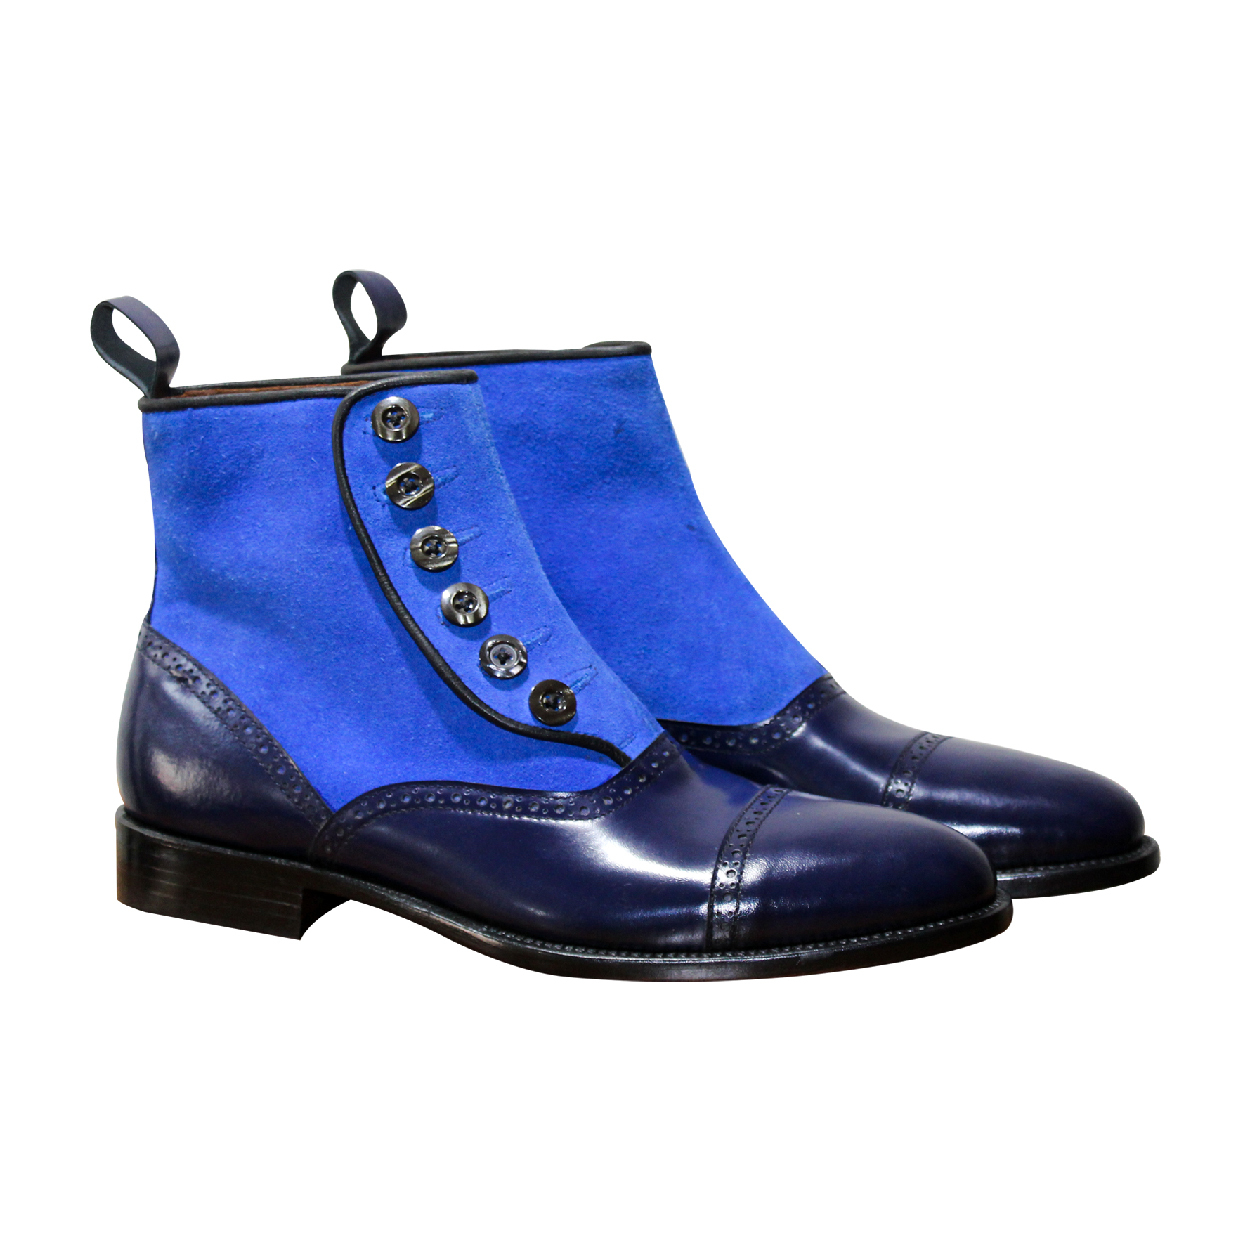 Handmade Men's Blue Suede & Leather High Ankle Buttons Boots